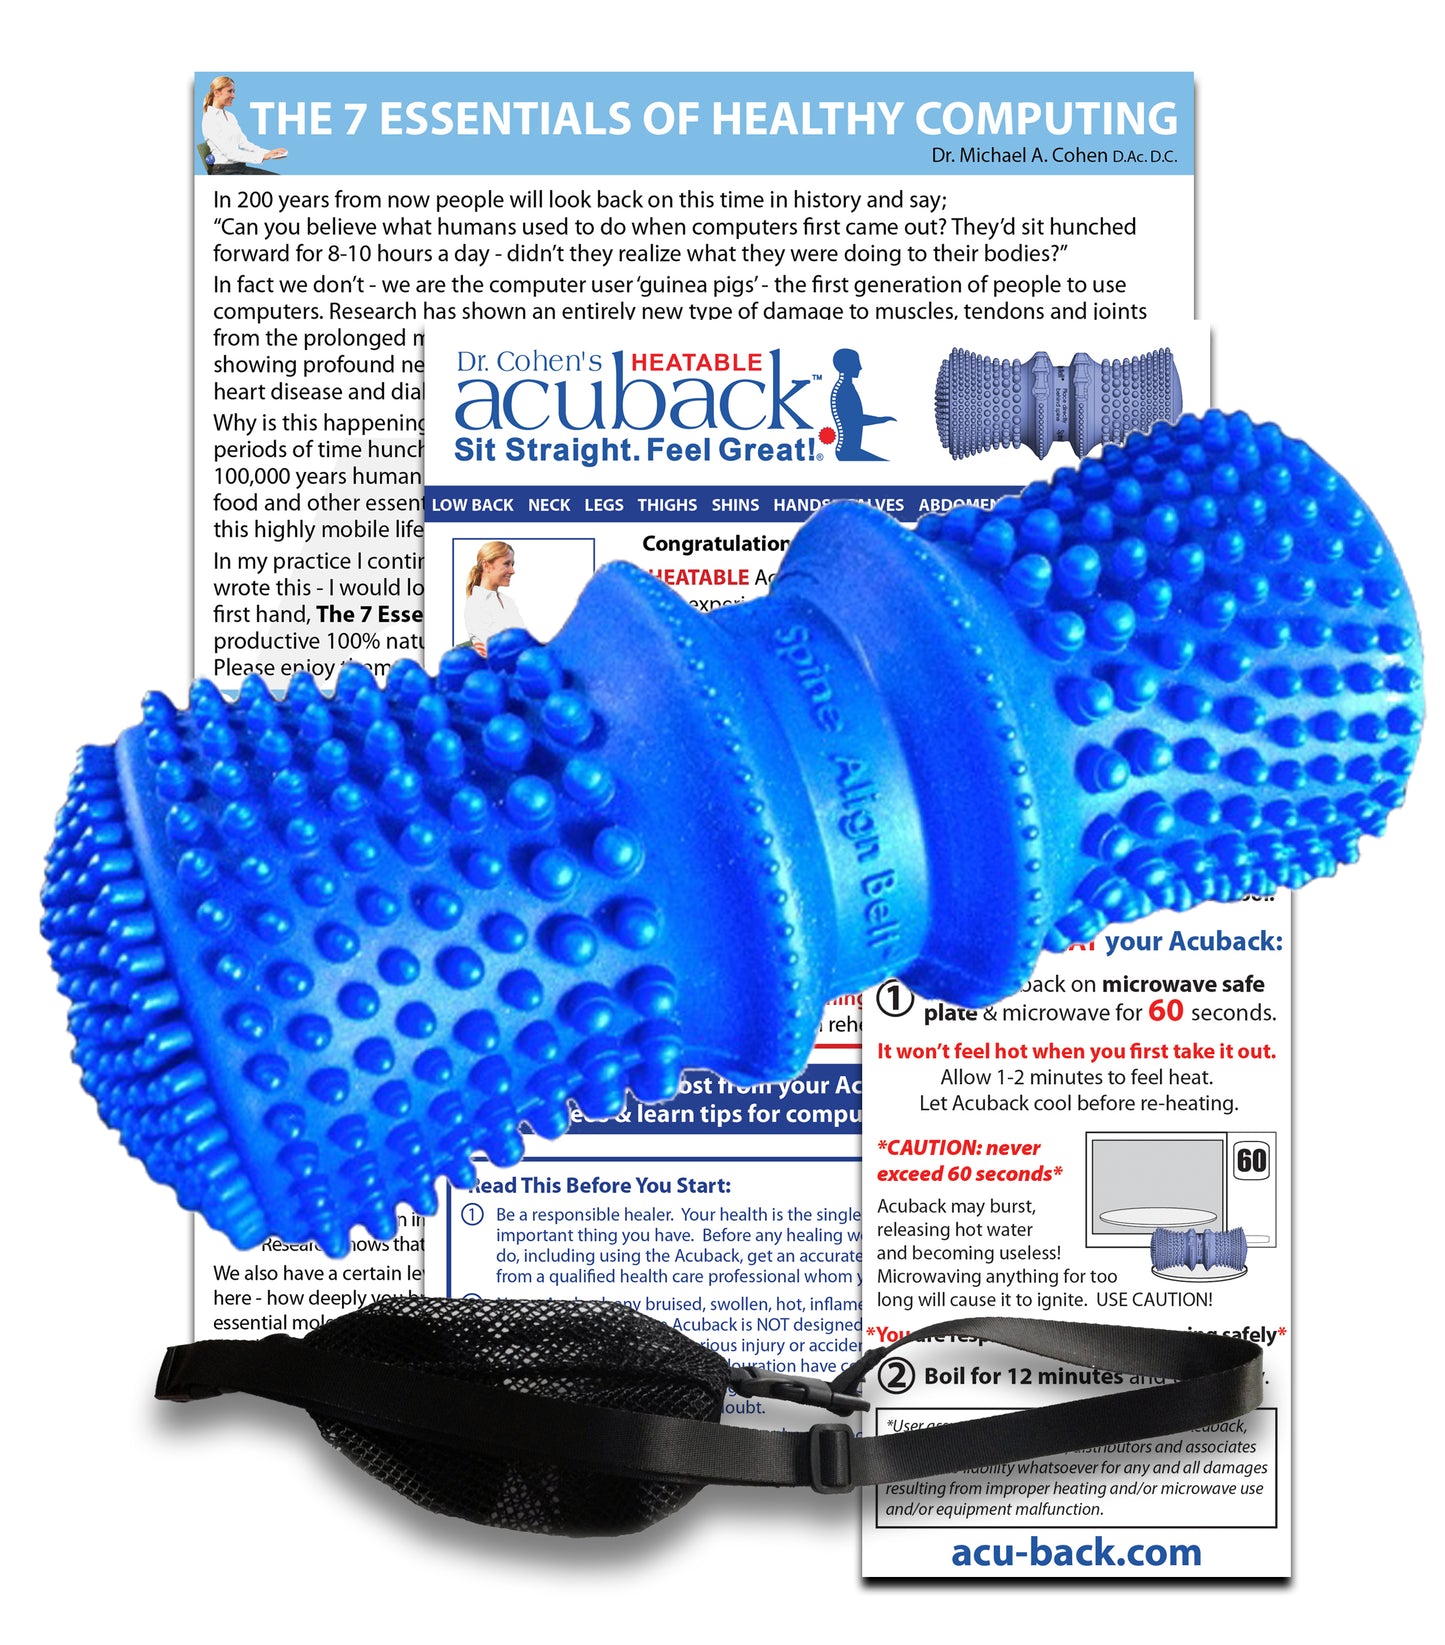 Dr. Cohen’s Heatable Acuback Kit Fitness Accessories Canada.